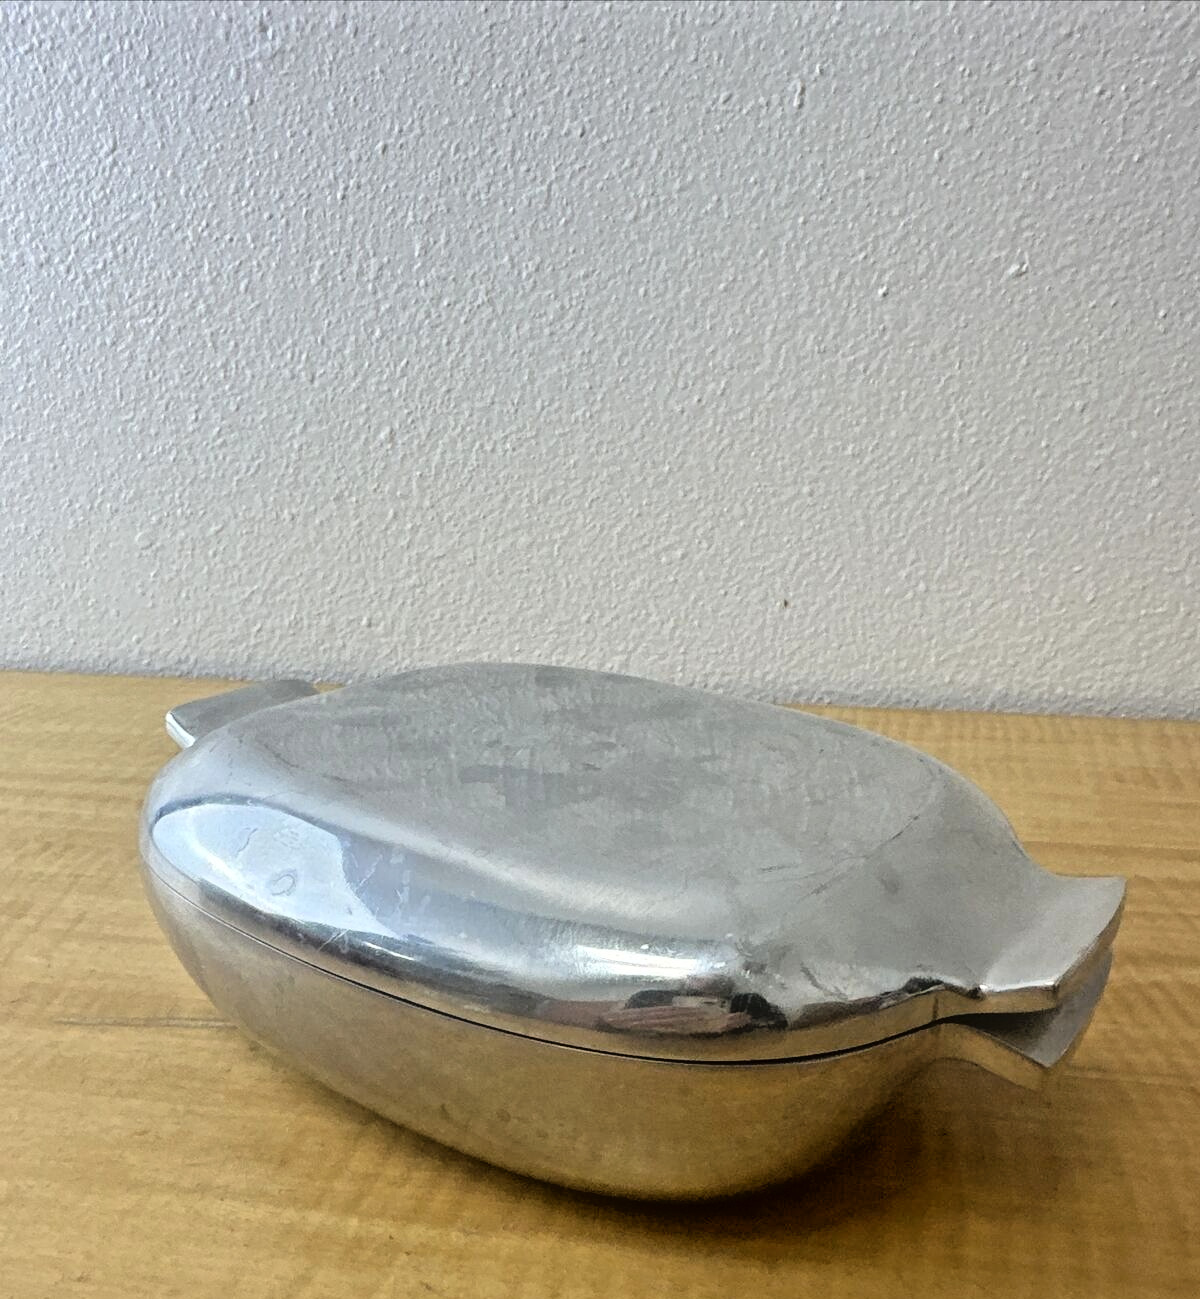 Vintage 1960s NAMBE Aluminum Alloy COVERED CASSEROLE BAKING DISH #15 With Lid